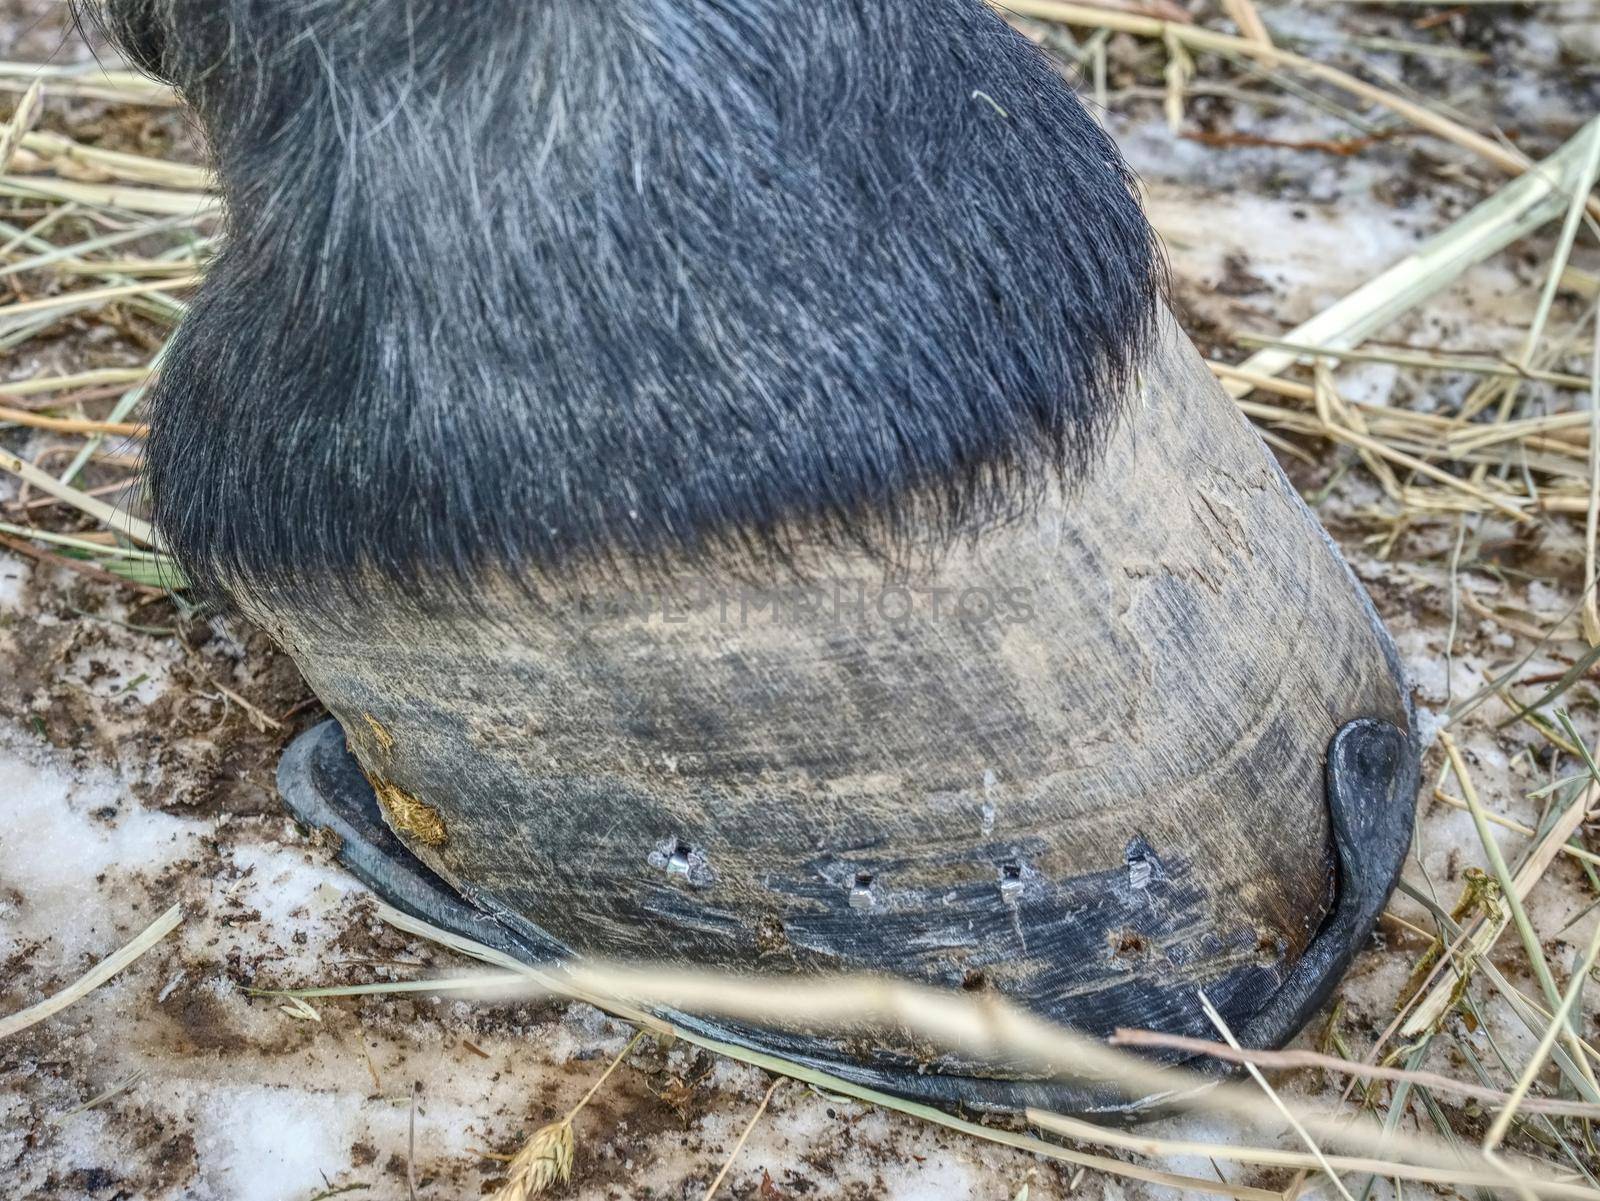 Feet running sports horse. The leg of shod horse. Hooves of a horse with horseshoes.